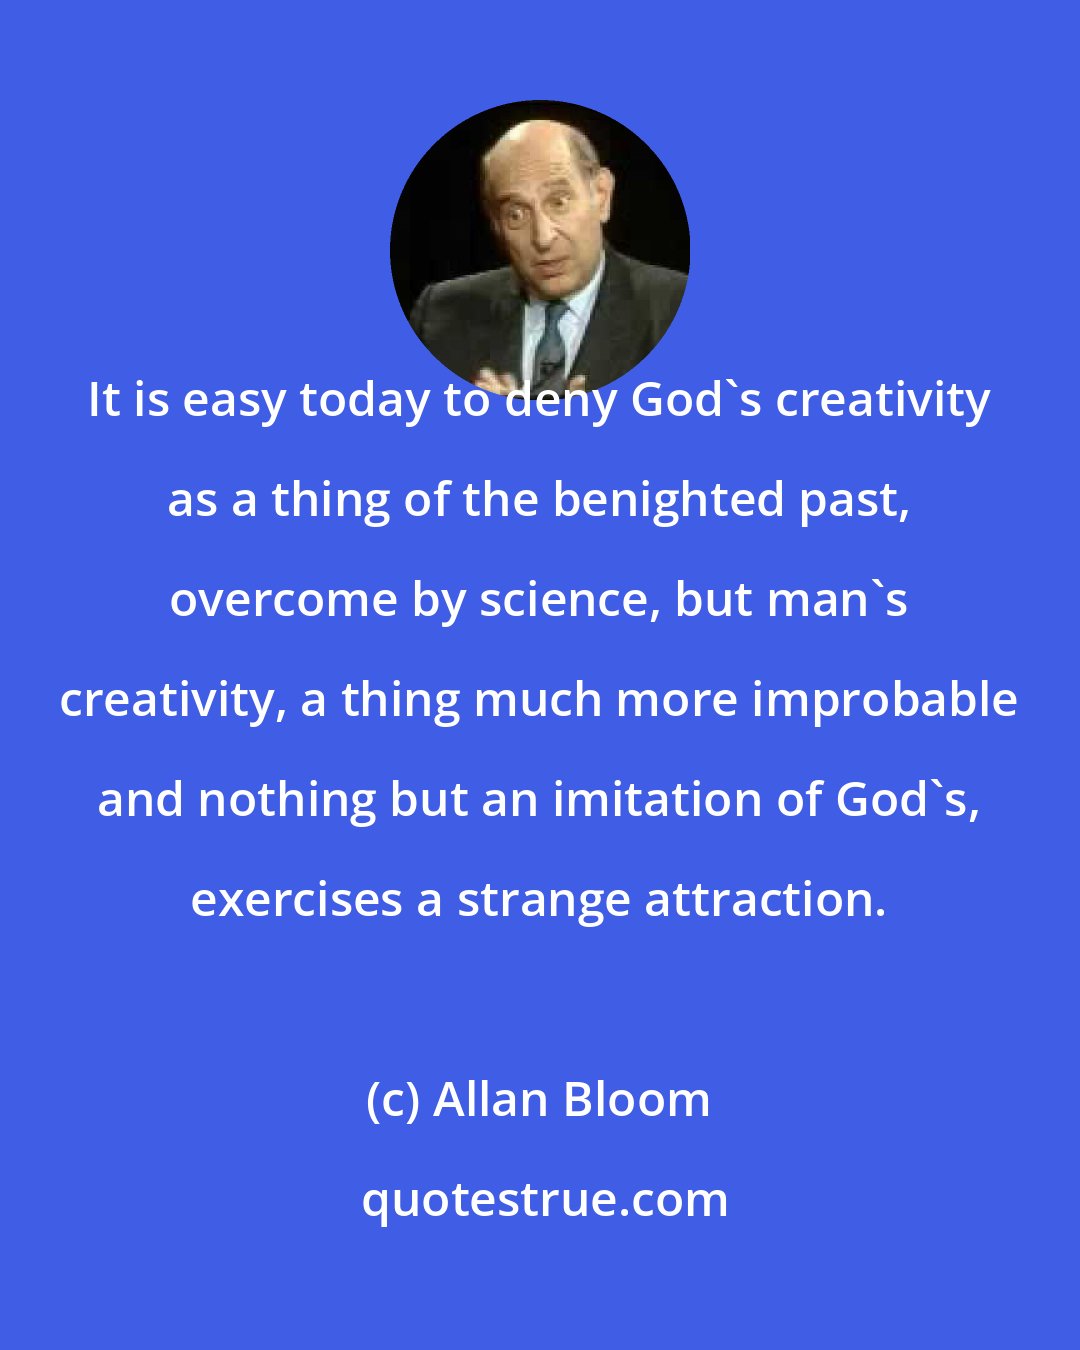 Allan Bloom: It is easy today to deny God's creativity as a thing of the benighted past, overcome by science, but man's creativity, a thing much more improbable and nothing but an imitation of God's, exercises a strange attraction.